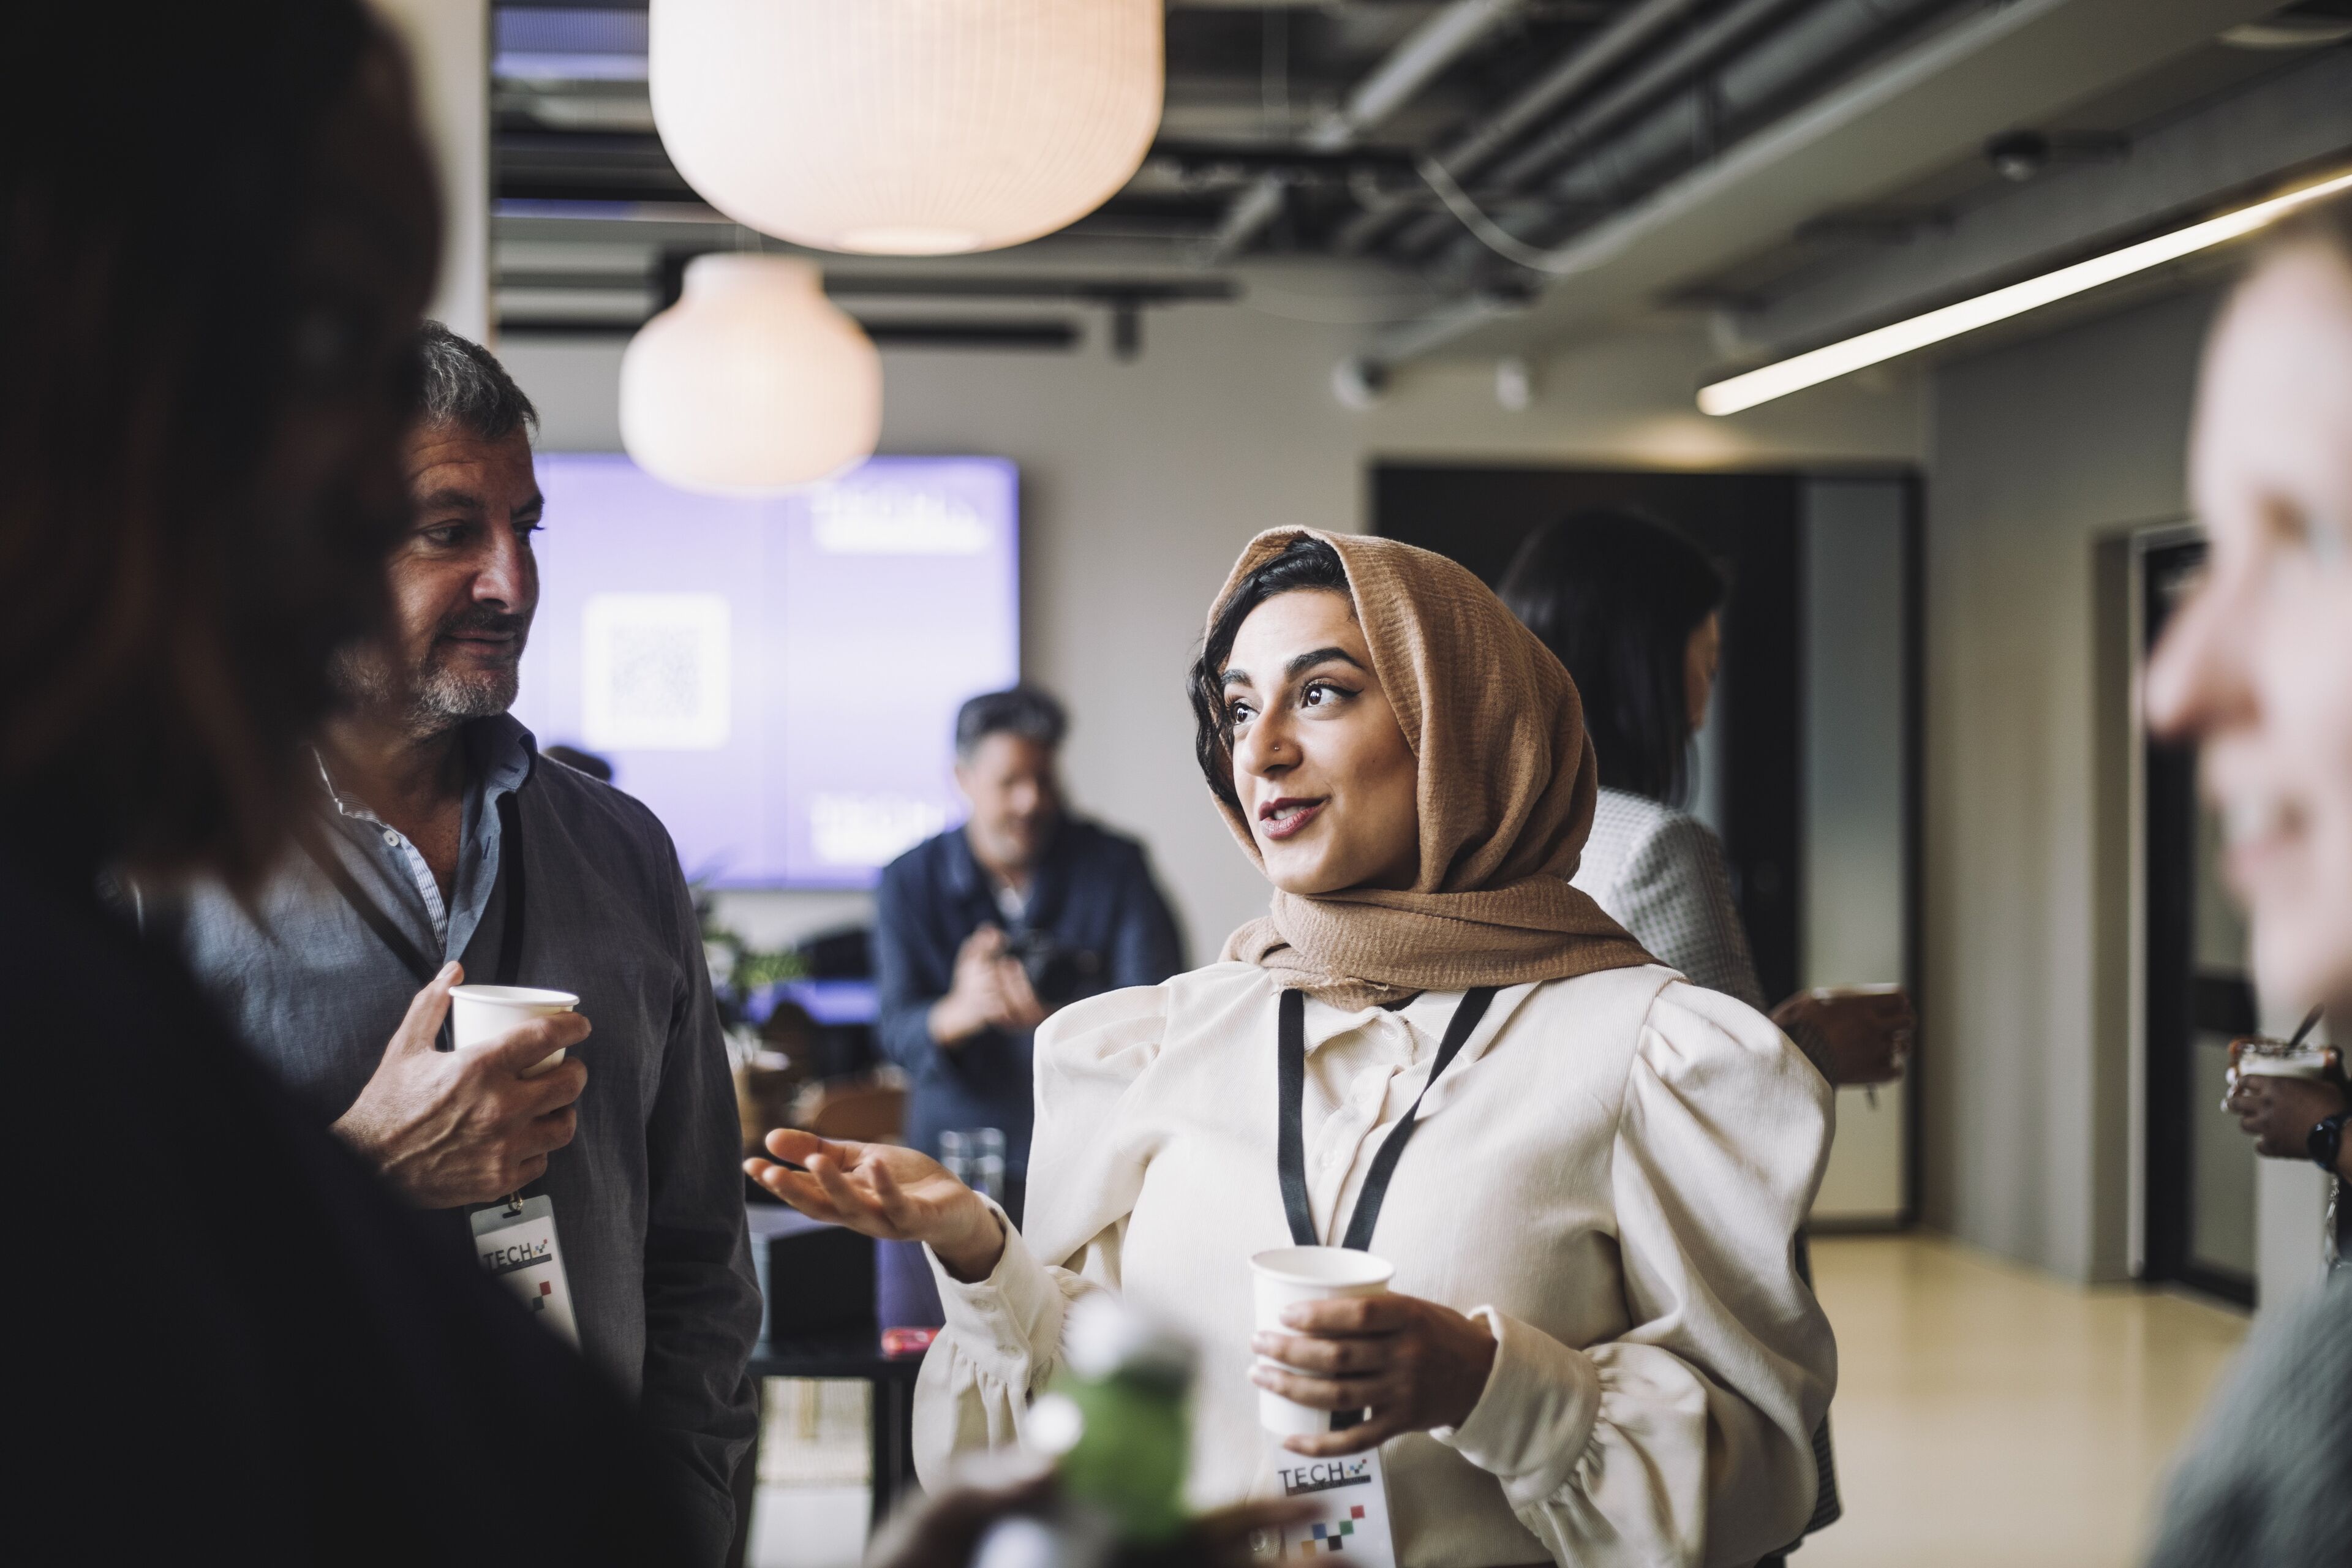 A woman in a hijab converses with colleagues over coffee in a relaxed, contemporary networking event setting.